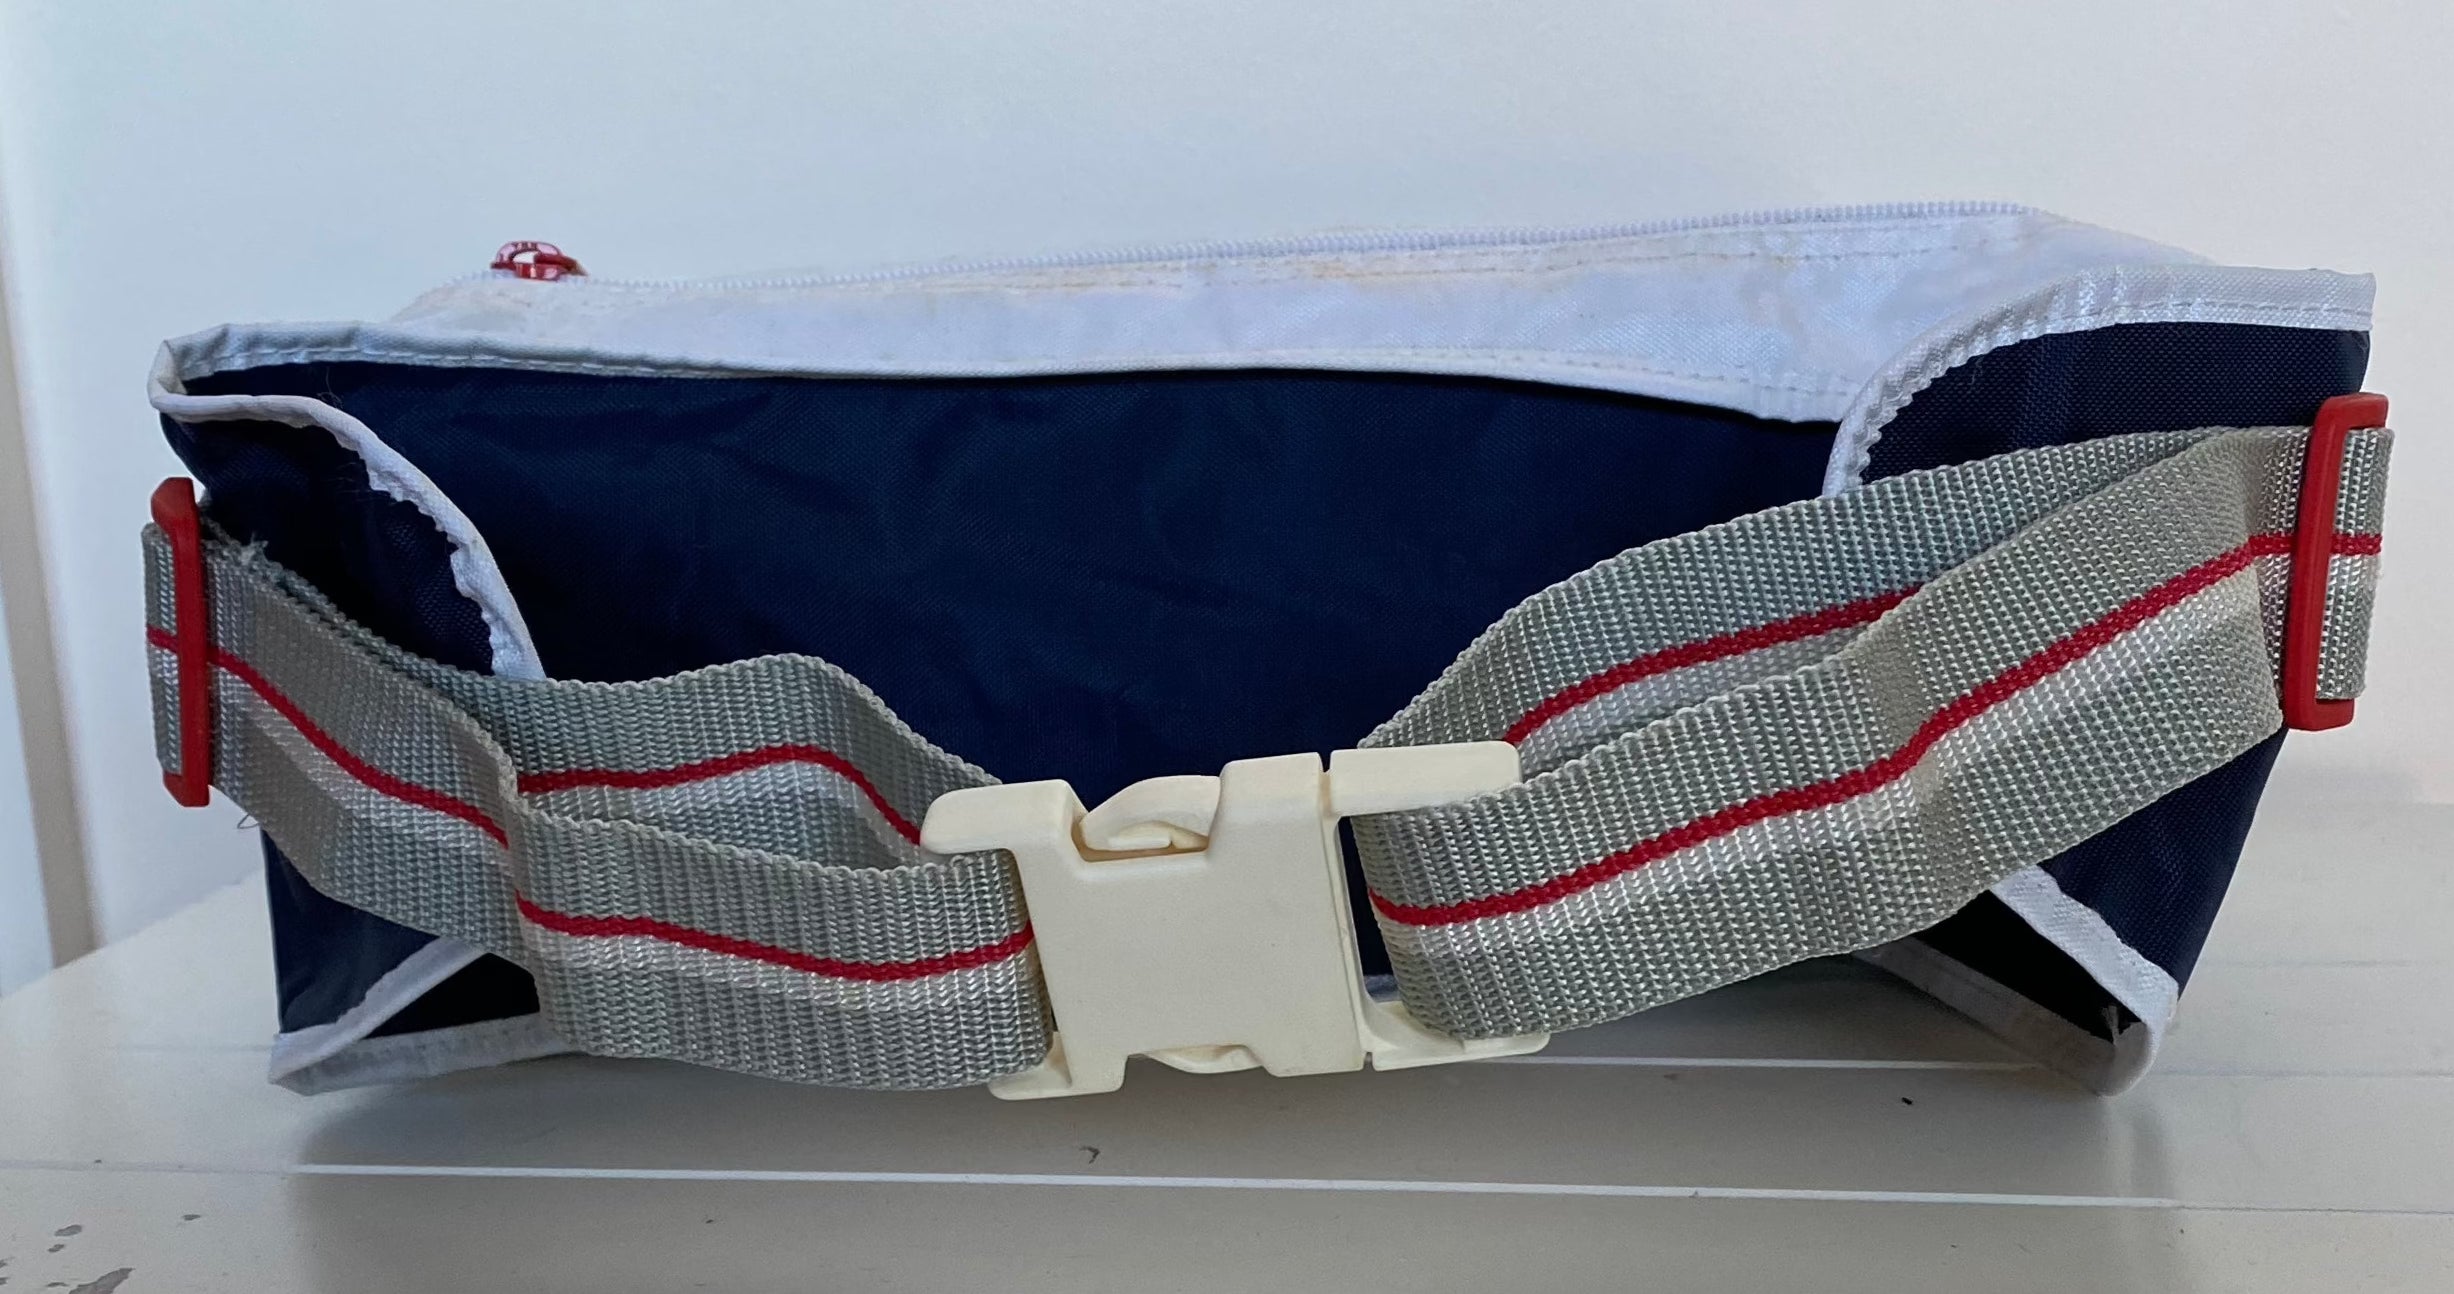 Salomon navy blue and white bag with a grey red & white waist strap bum bag from rear